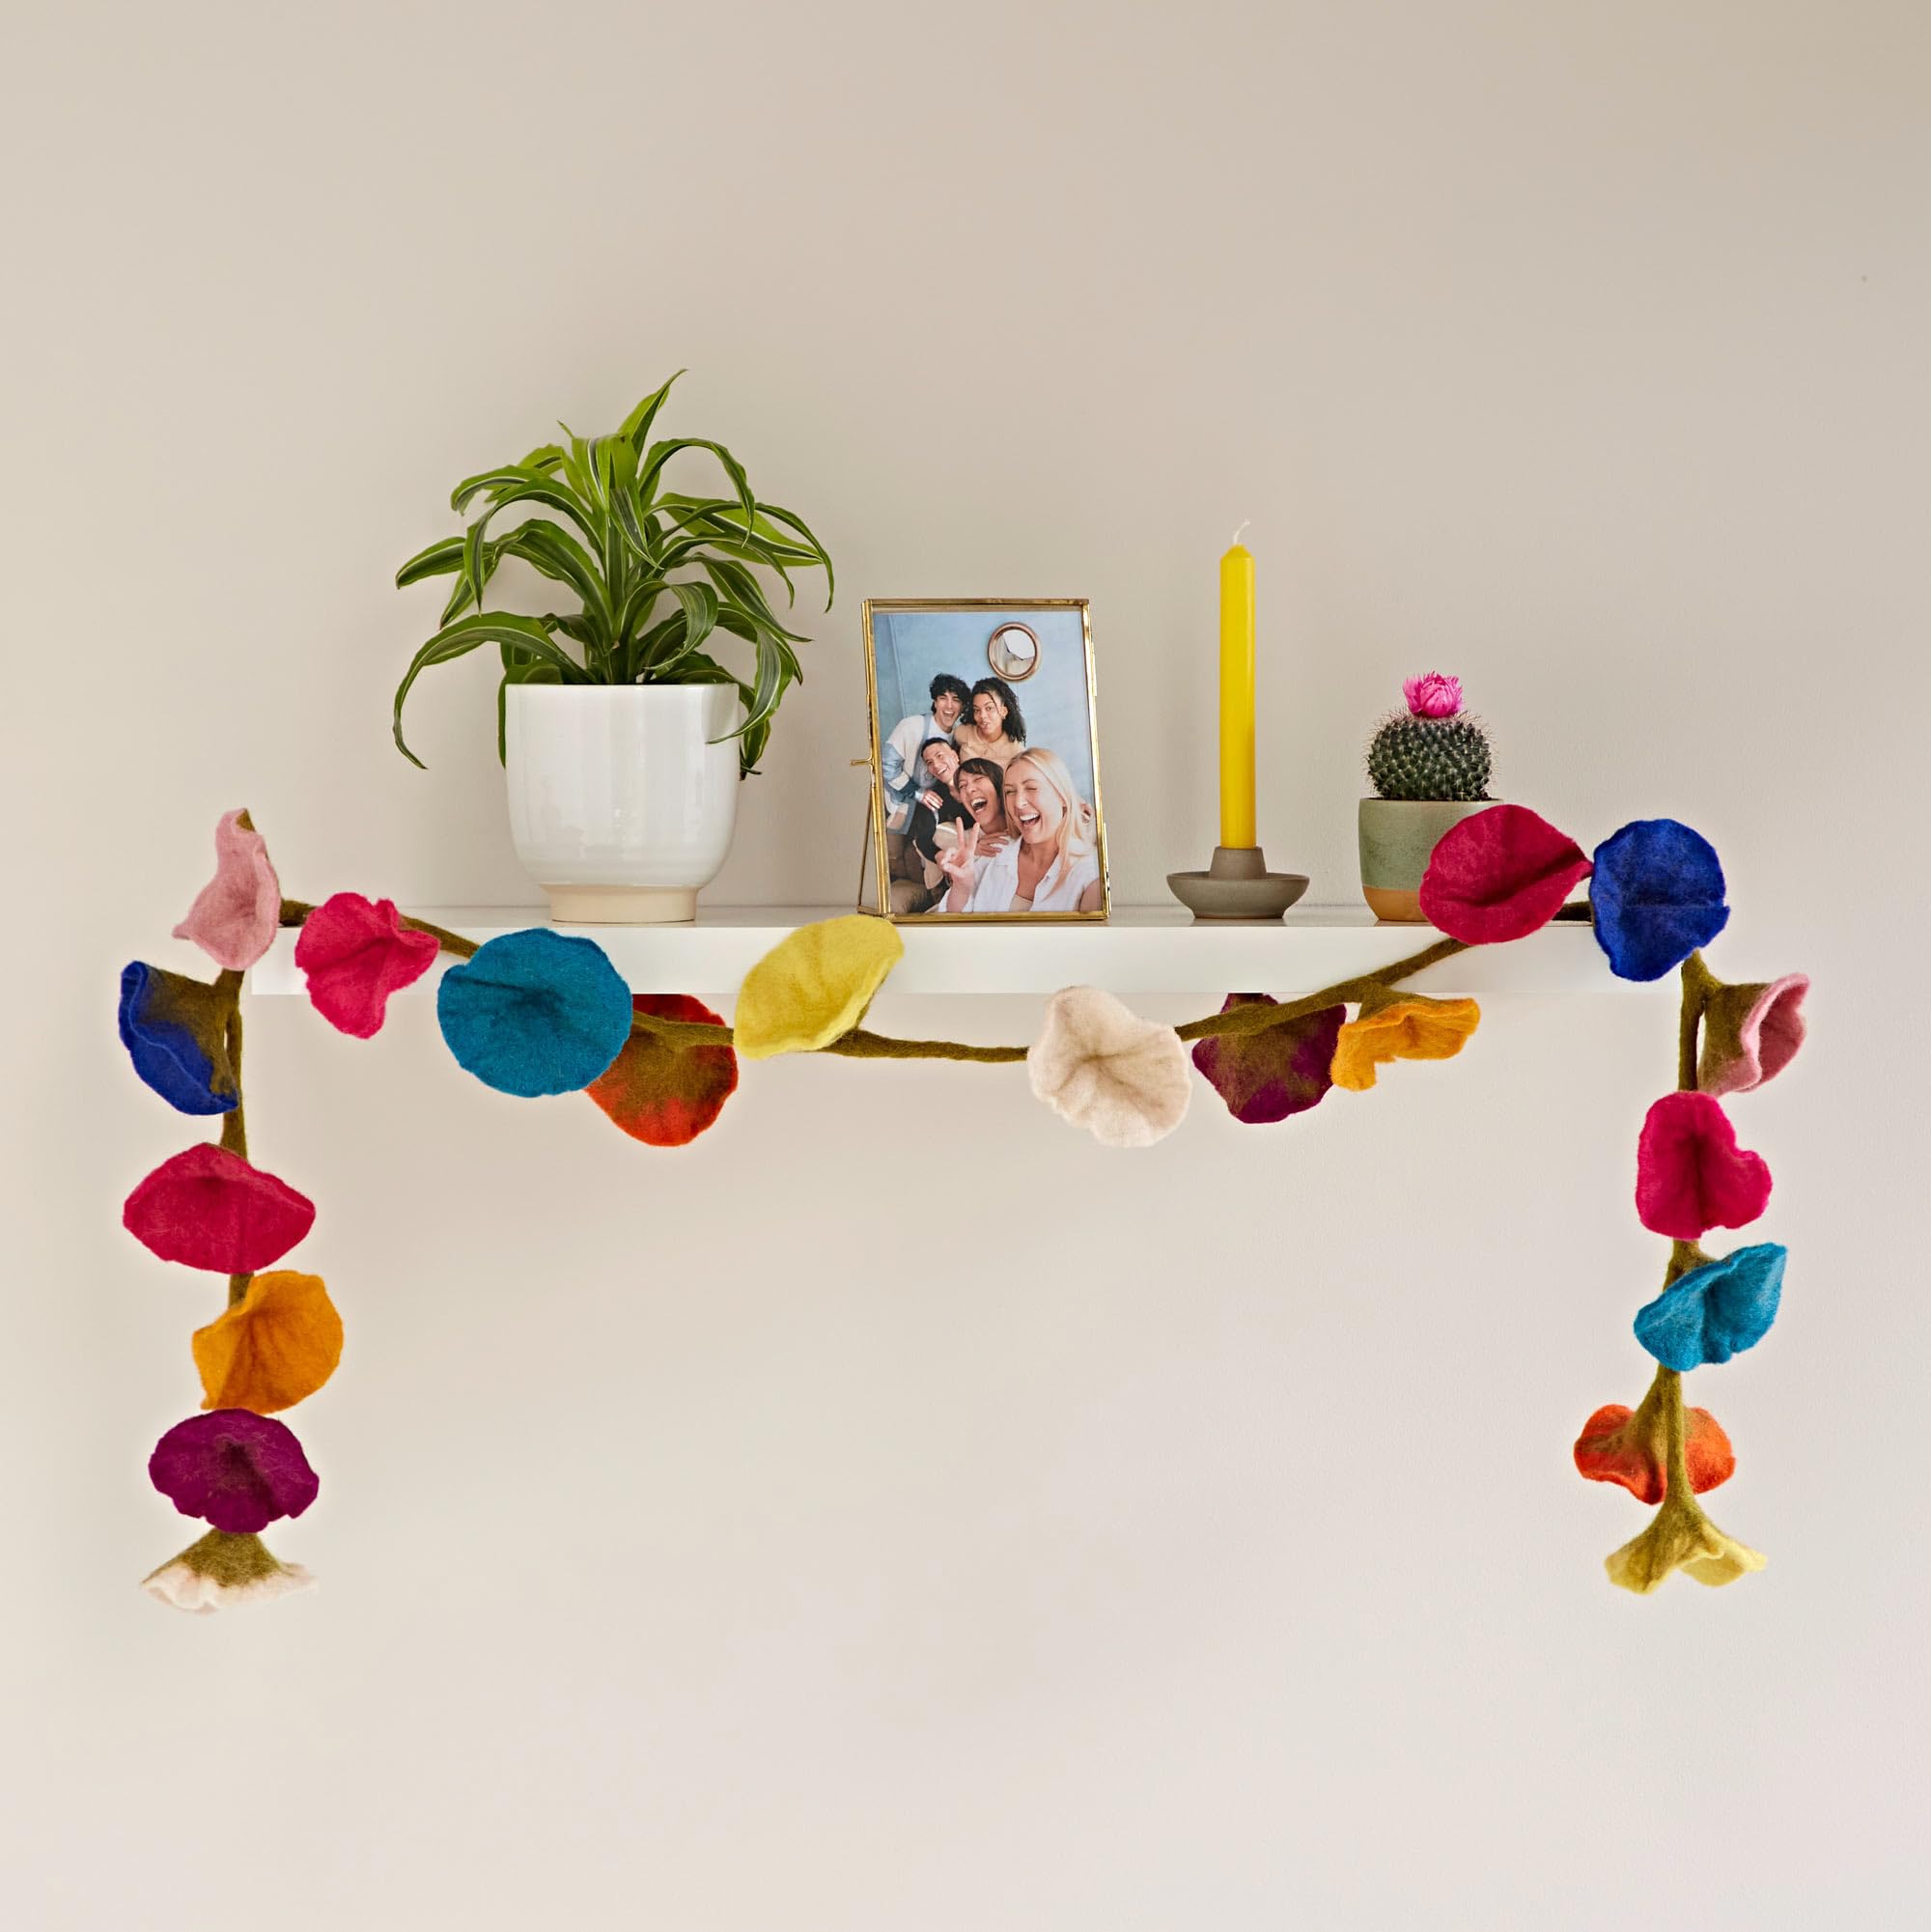 Handcrafted Felt Flower Garland | Multicoloured | 160cm Long with 20 Flowers | Hand Felted Hanging Decoration | Garden Garlands and Bunting Alternative | Mantelpiece Display